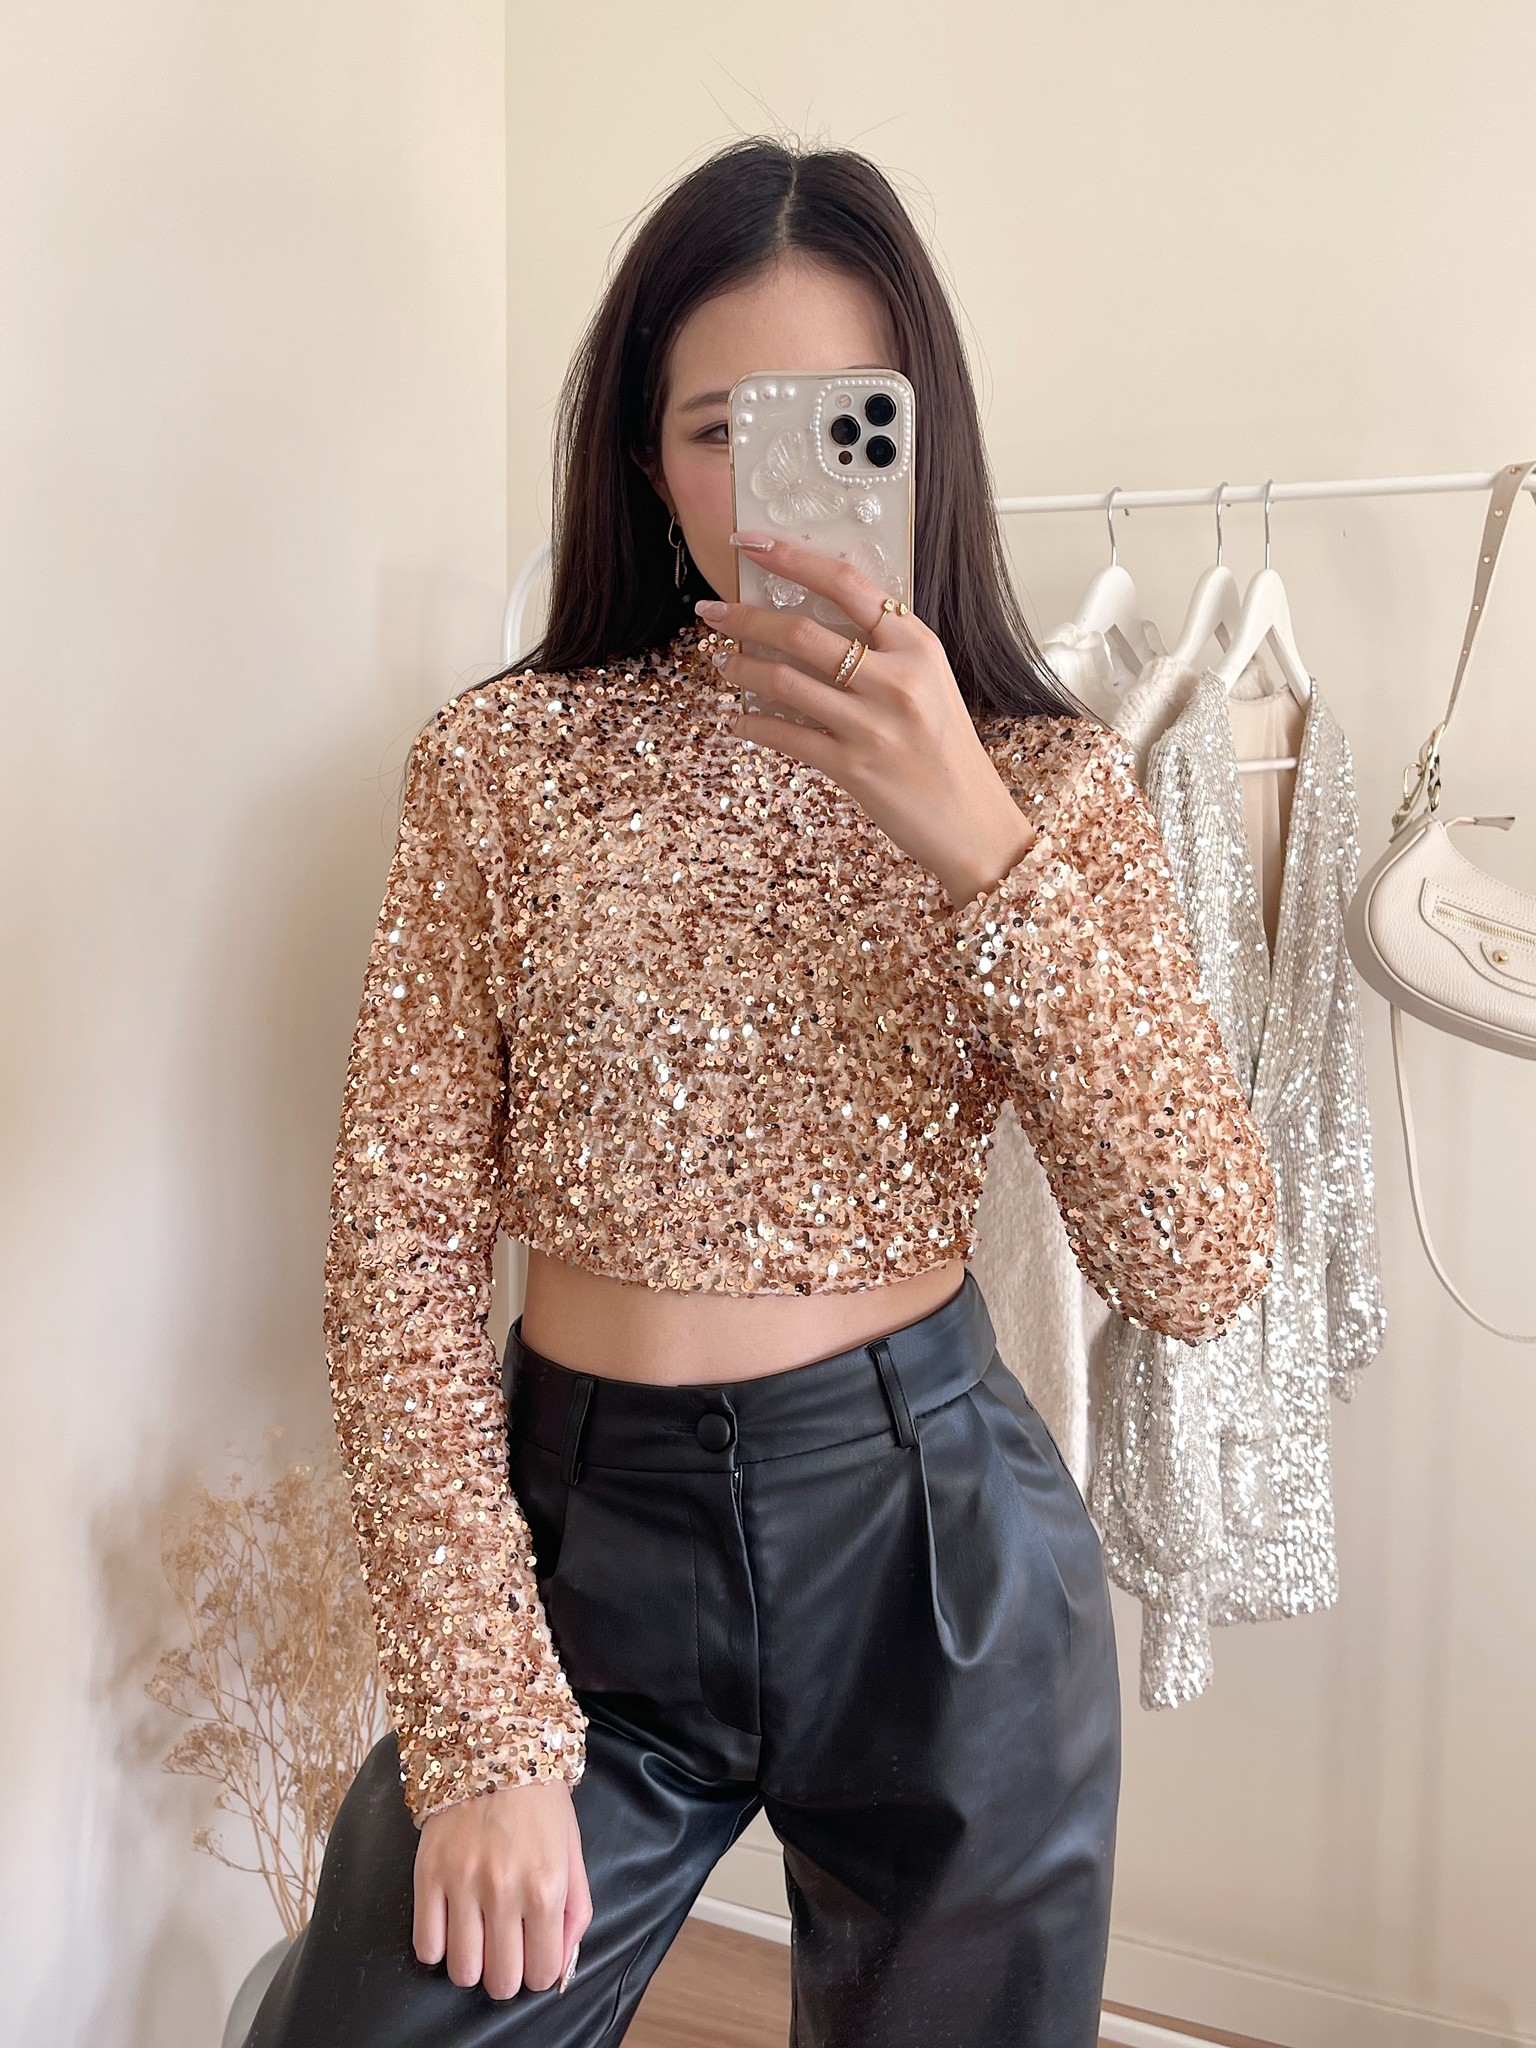 She's Got It All Gold Sequin Faux-Wrap Long Sleeve Crop Top  Gold long  sleeve tops, Long sleeve crop top, Sequin bodycon dress